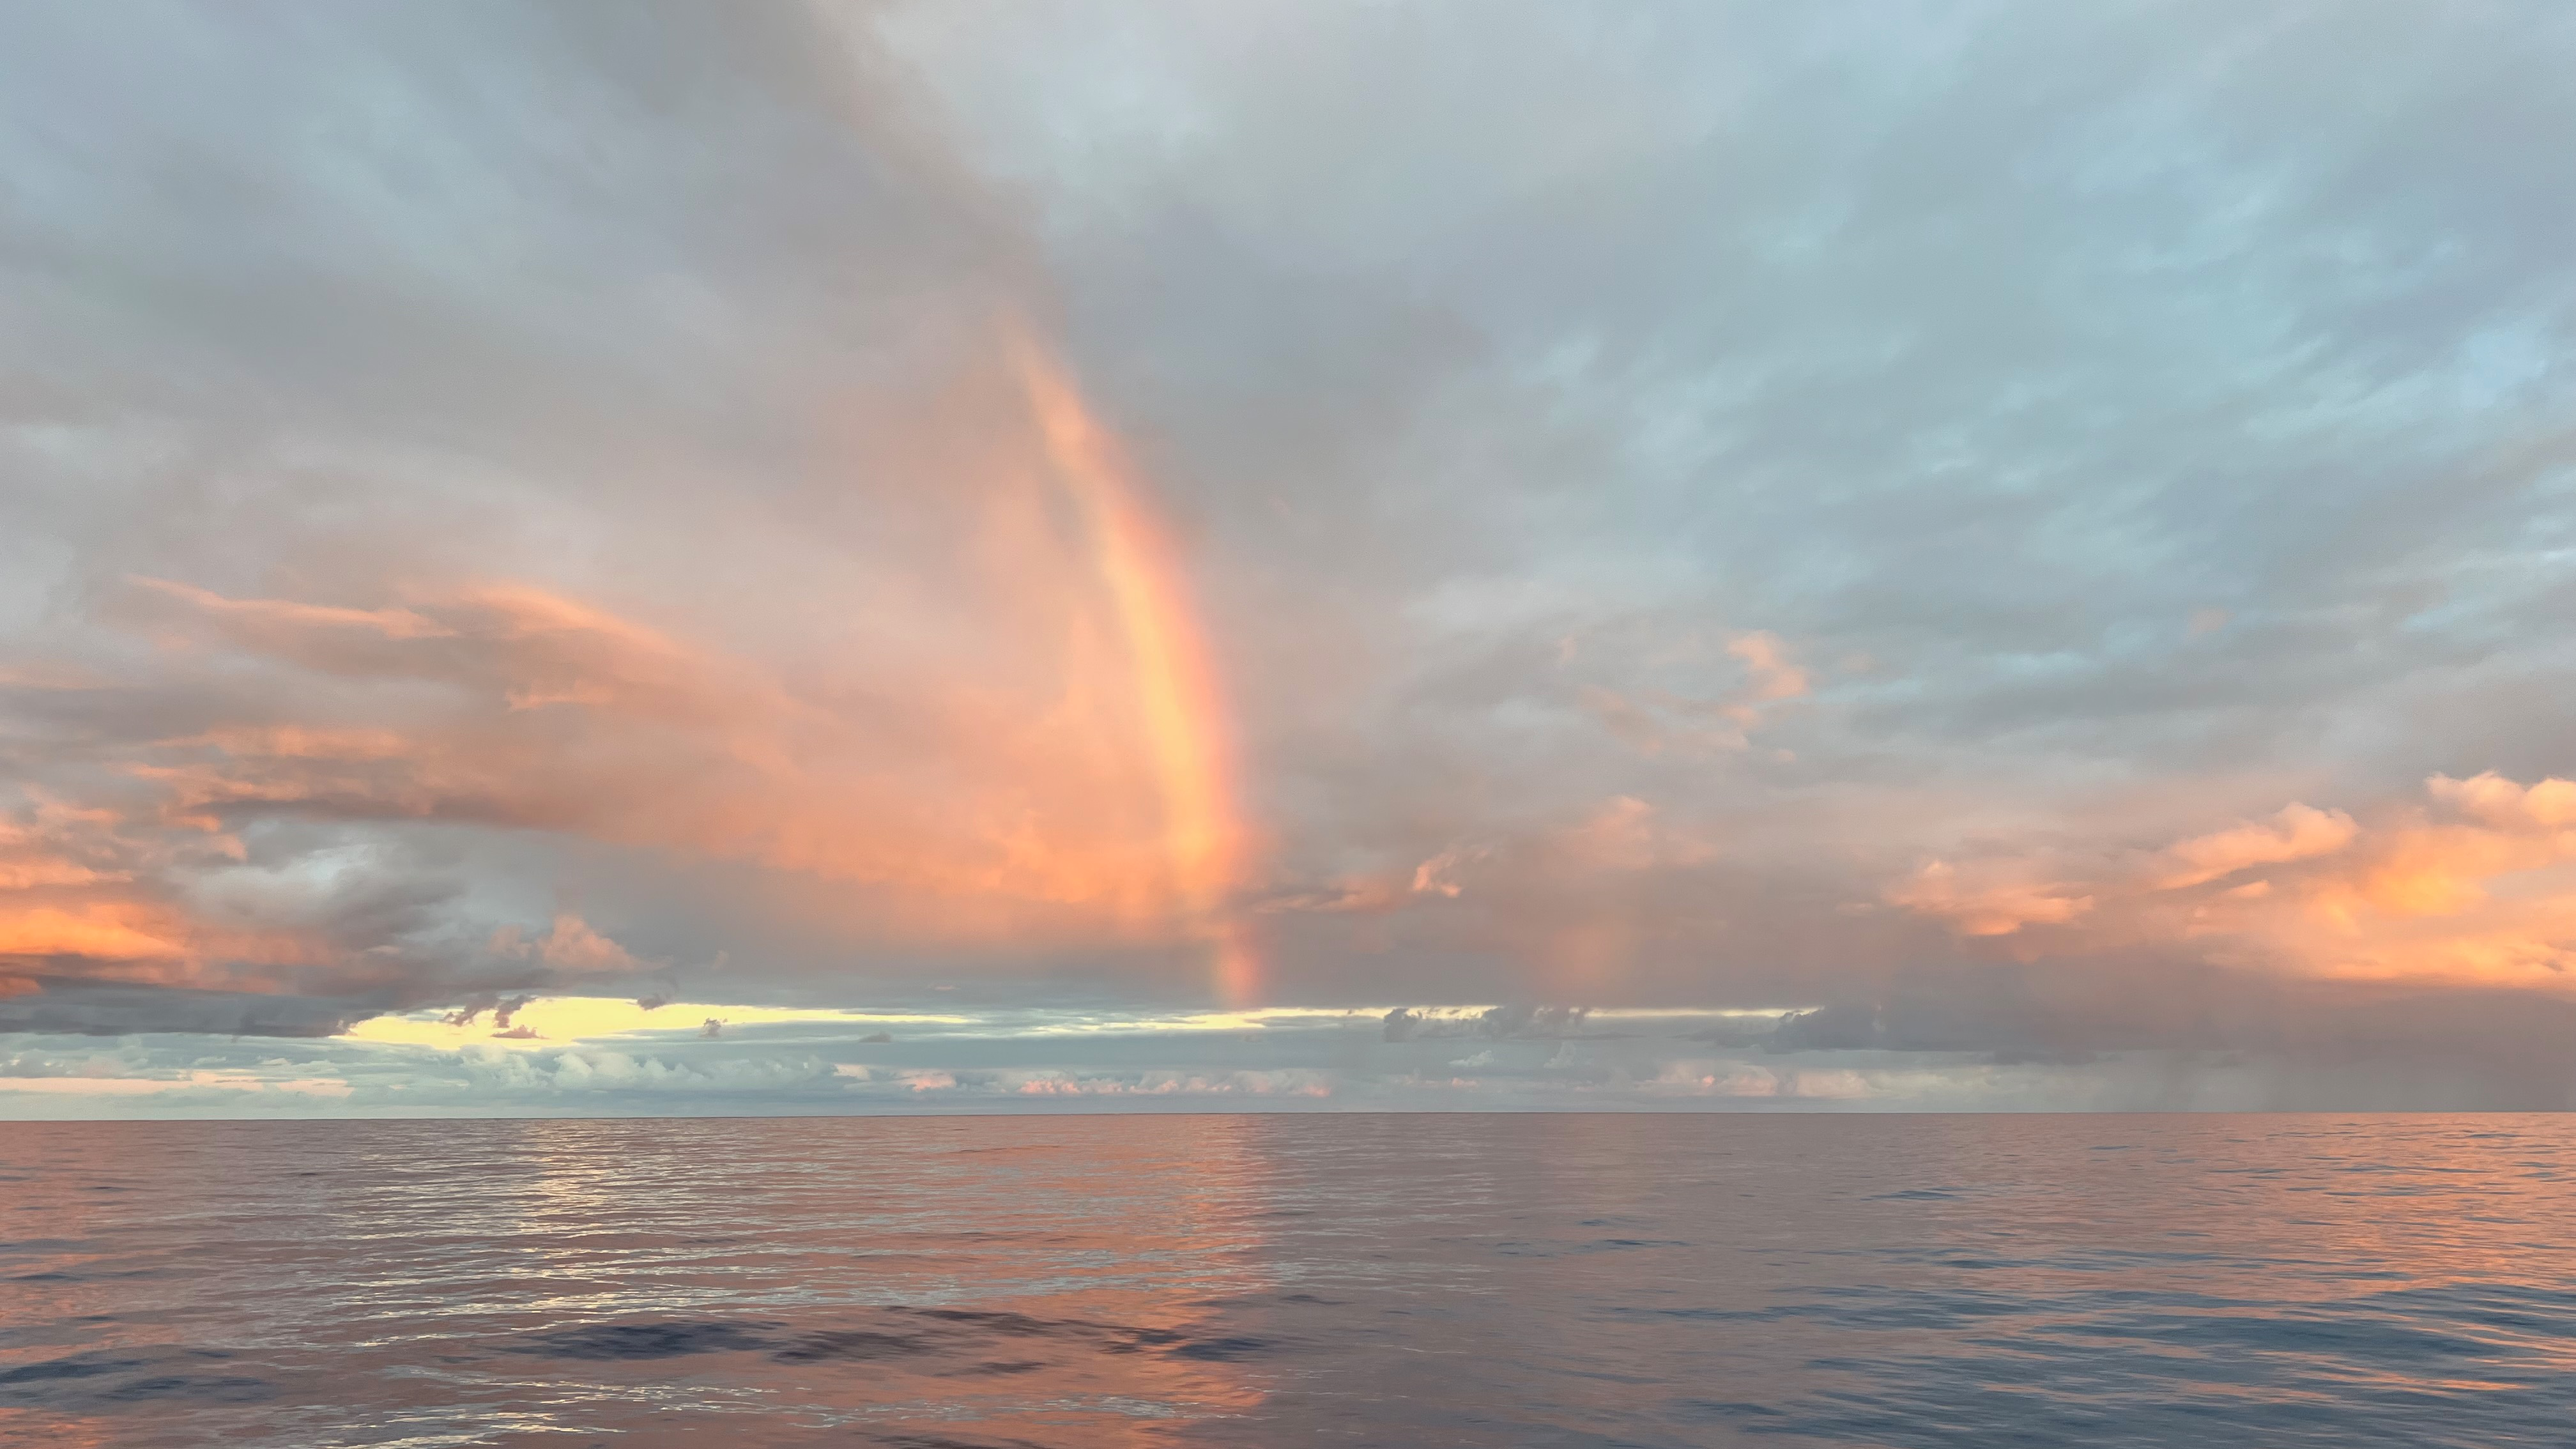 Lovely rainbow during launch. Photo by Andrew Collins